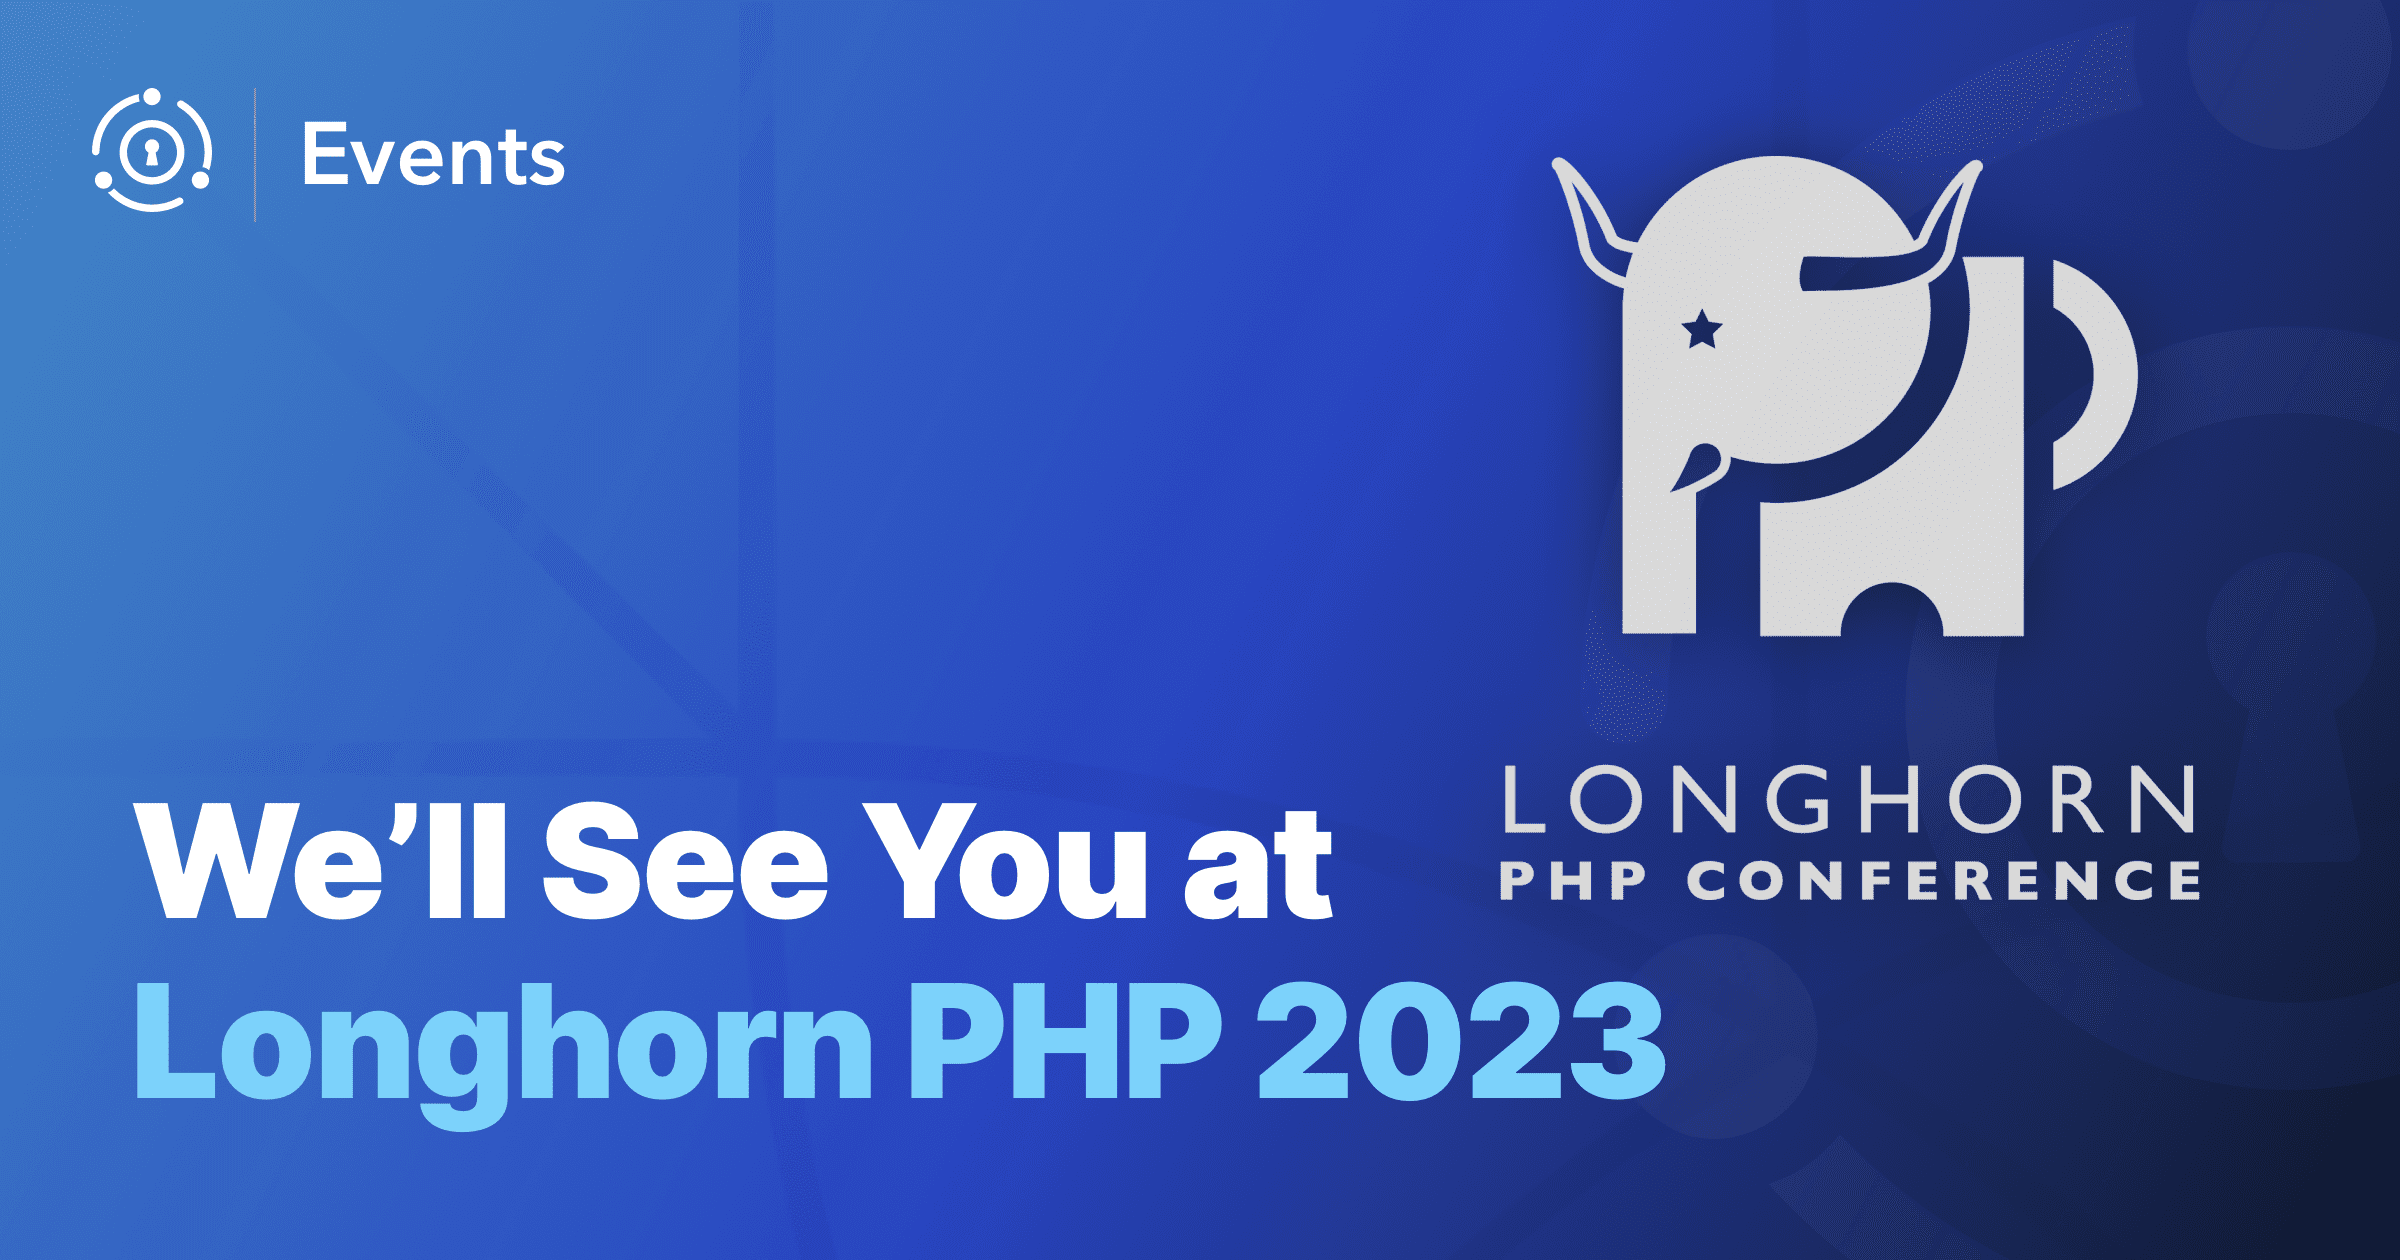 We'll see you at Longhorn PHP 2023